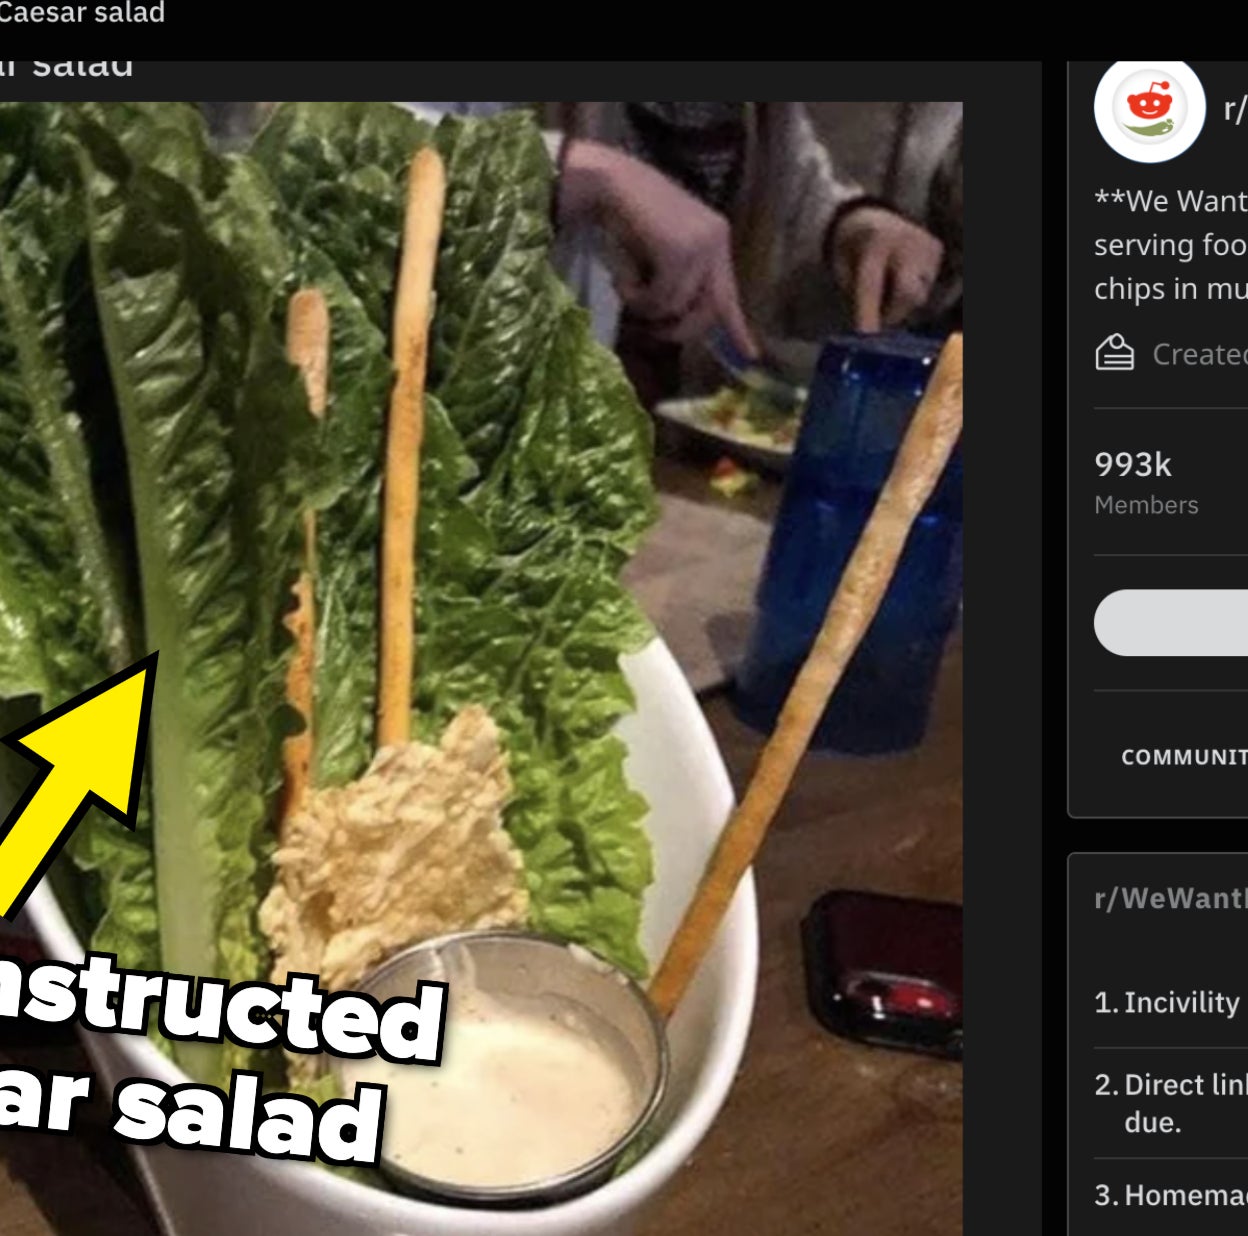 A deconstructed caesar salad is being shown